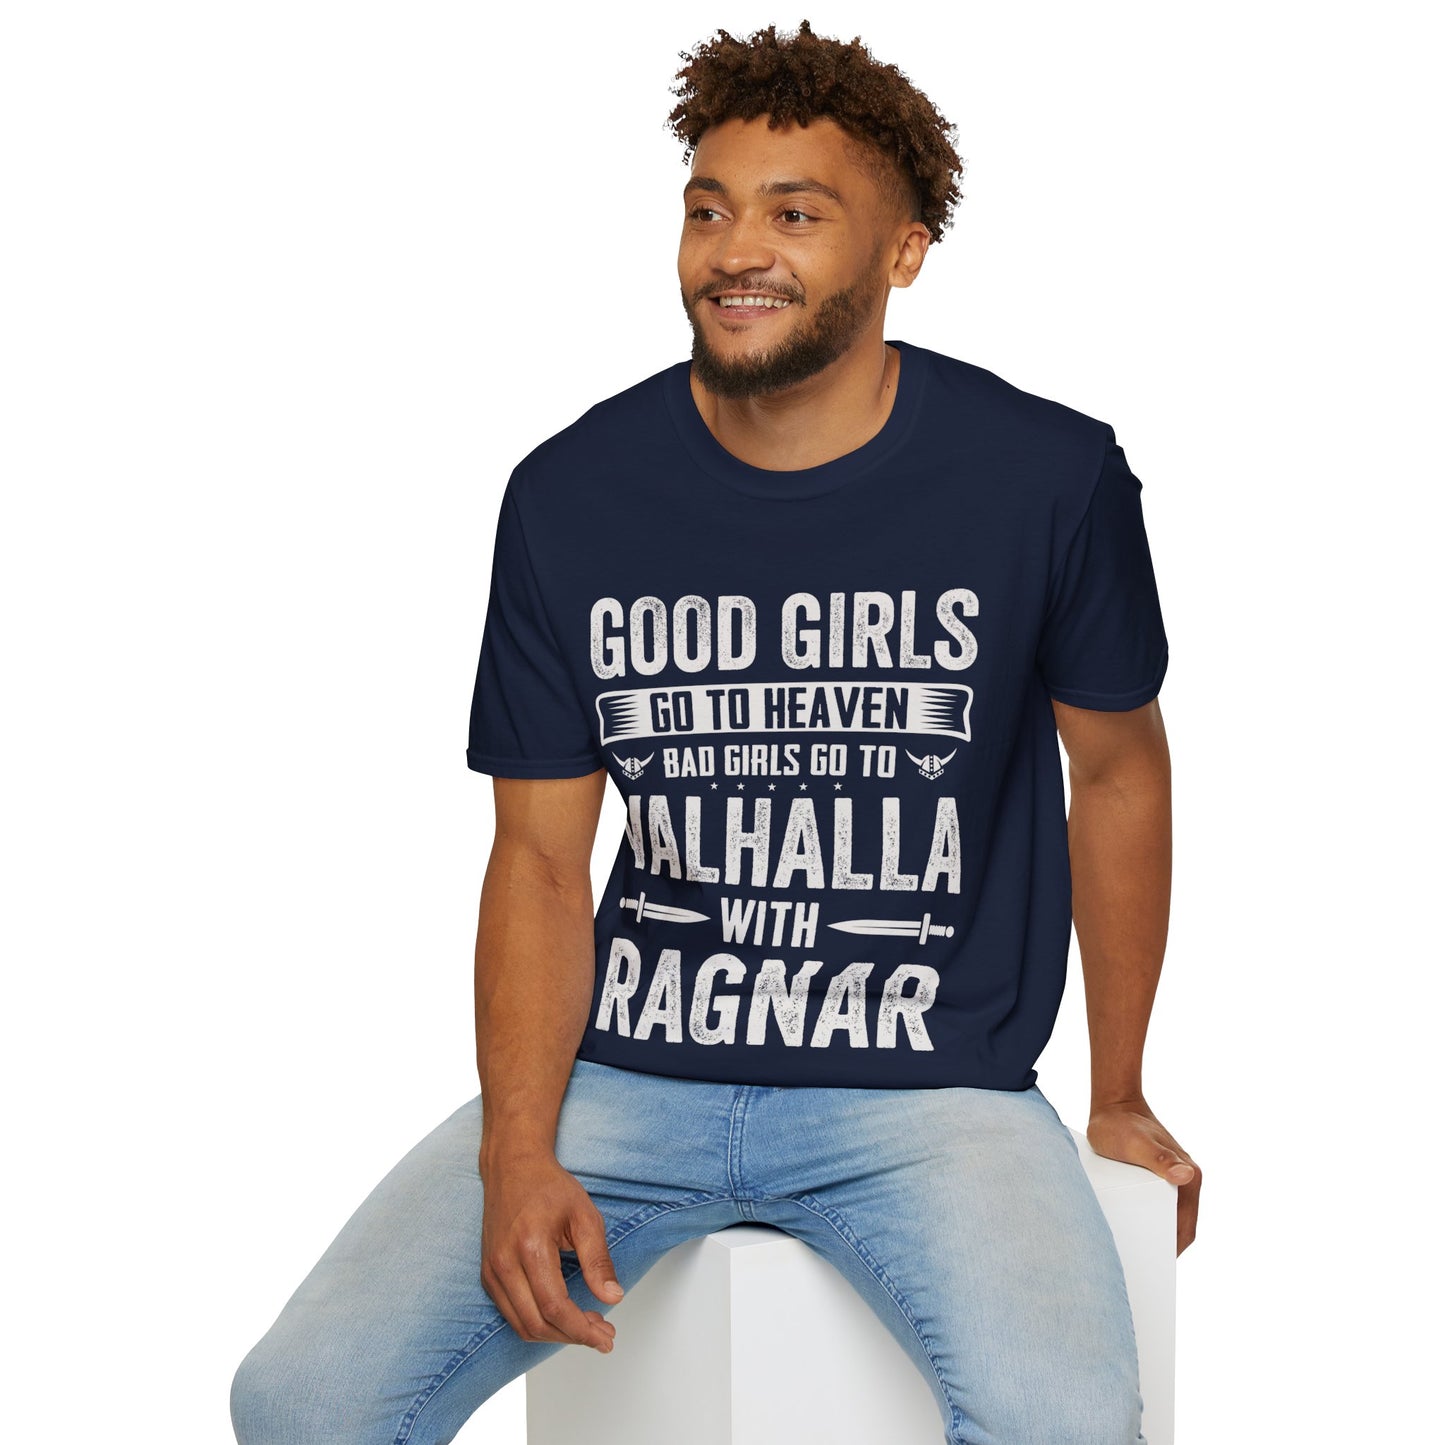 Good Girls Go To Heaven Bad Girls Go to Valhalla With Ragnar T-Shirt